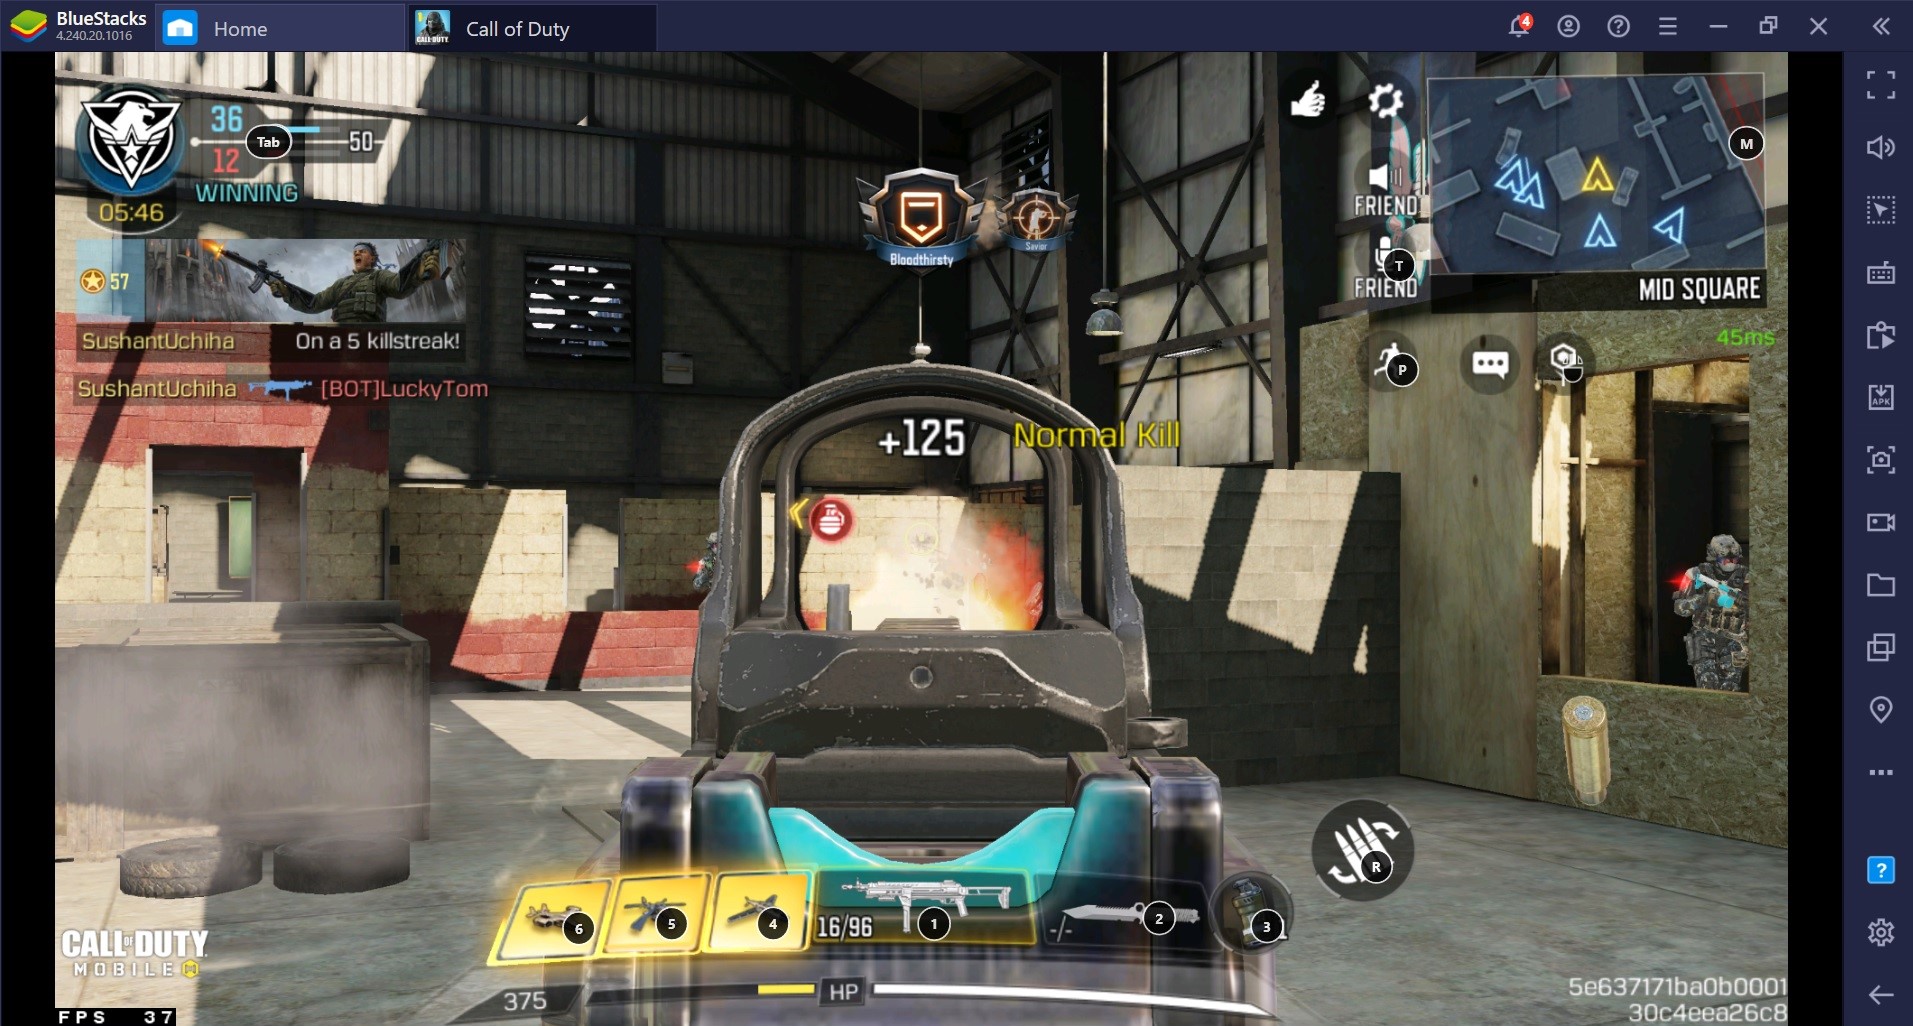 Call of Duty: Mobile Guide for the Senses, Learn How the Game is Played